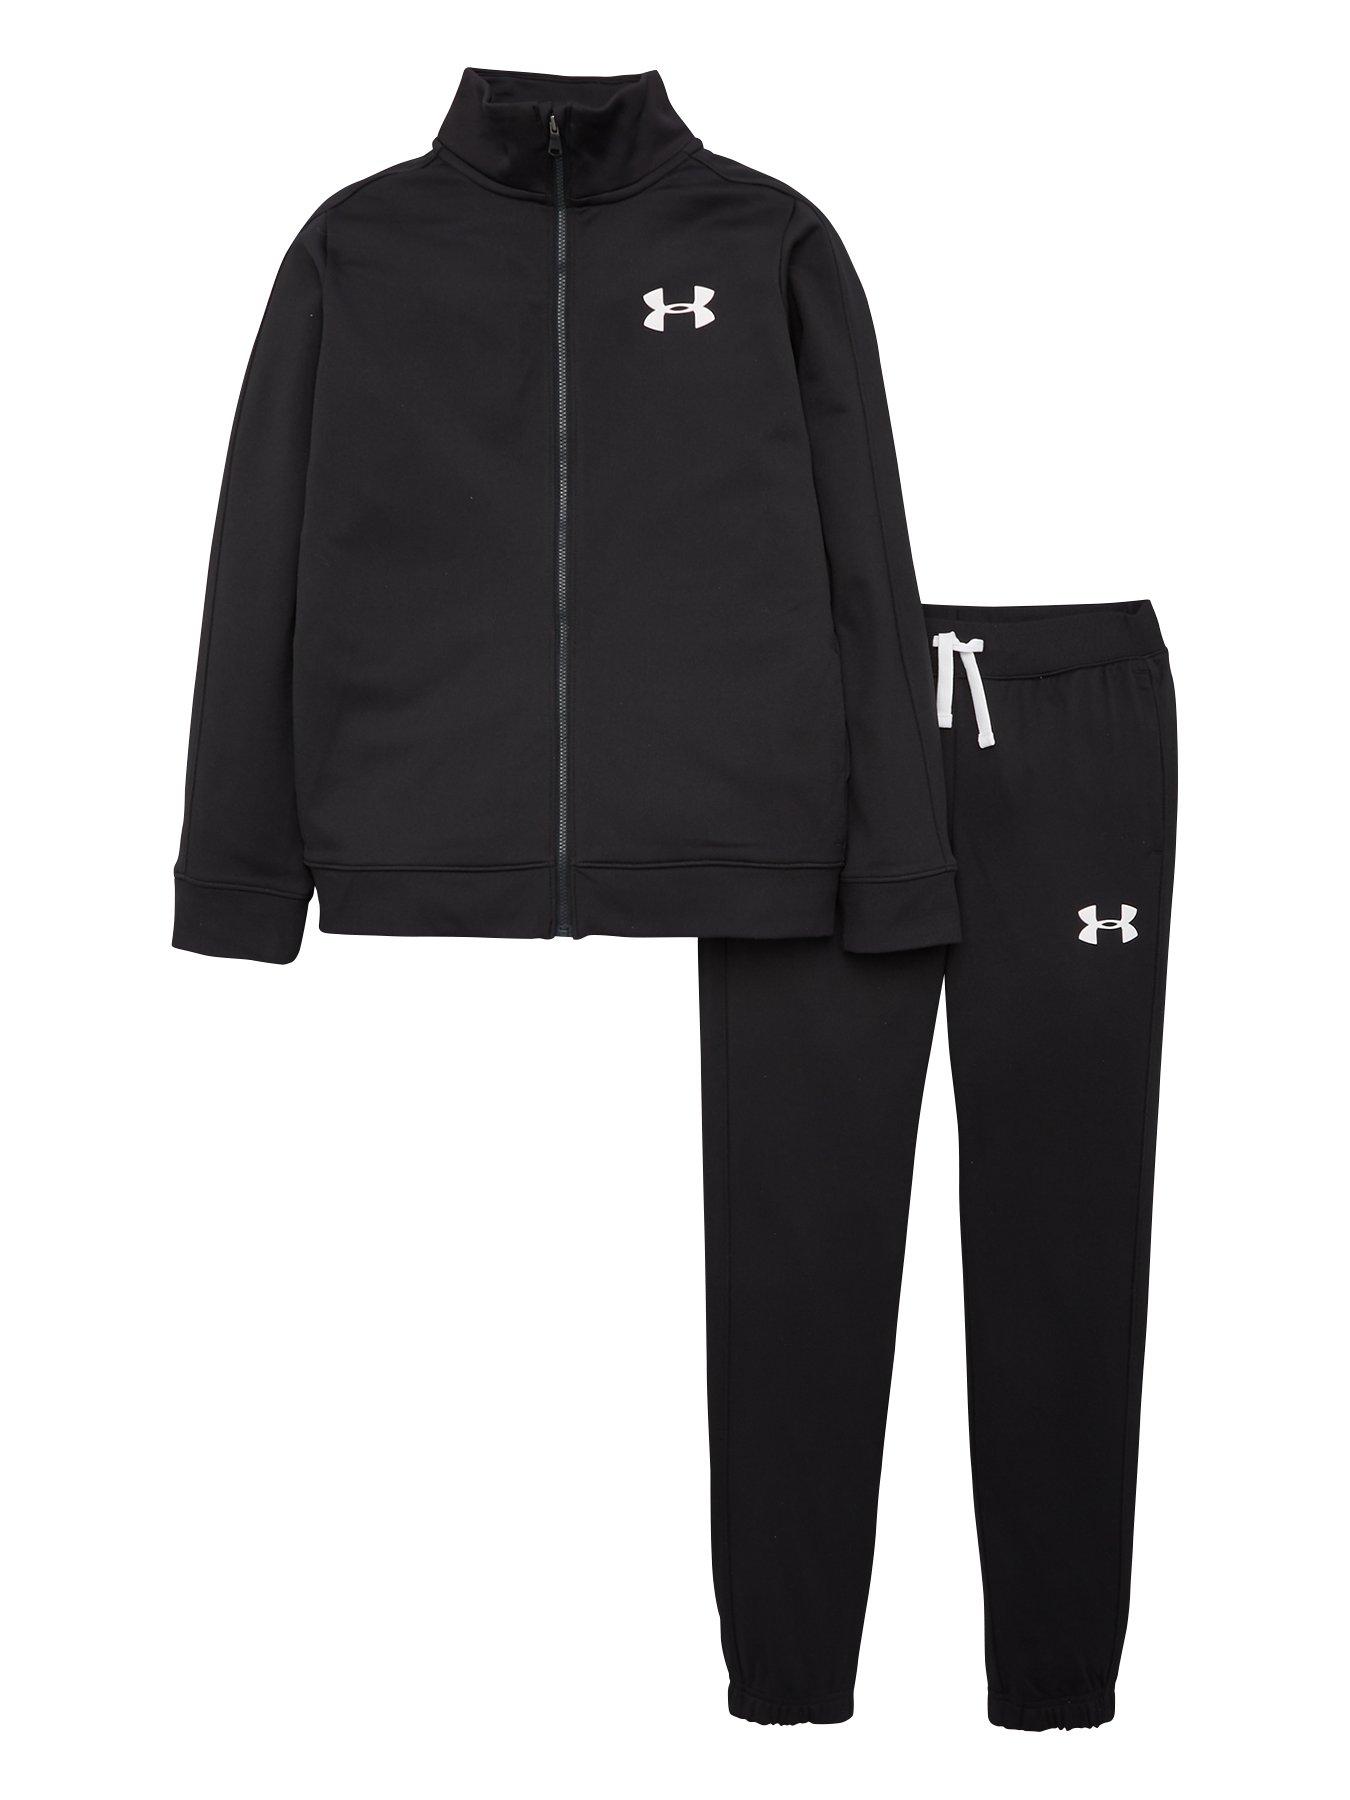 girls tracksuit age 10